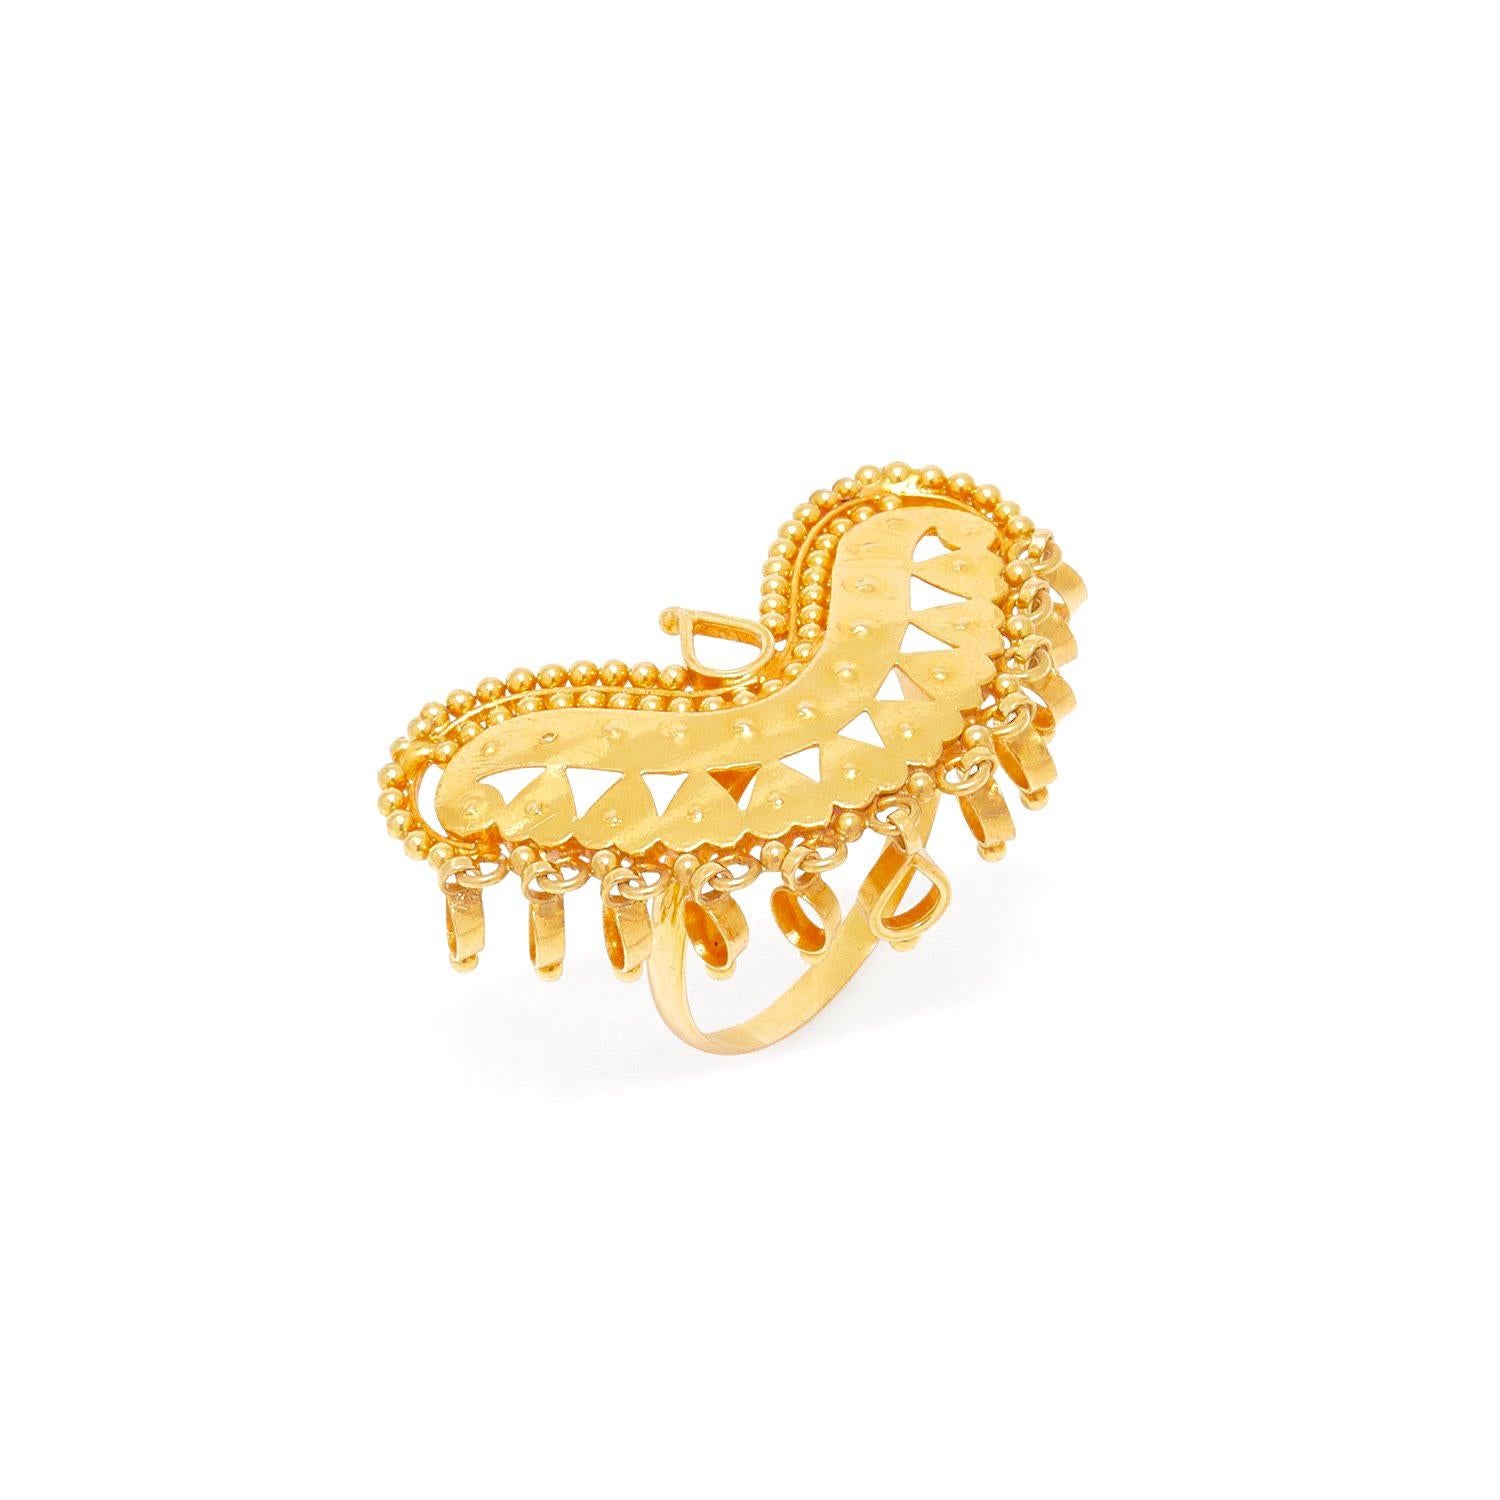 The ultimate in Jaipur Boho Style presented in a large heart-shaped 22 karat gold ring handcrafted in traditional Rajasthani tribal style with a fringe of gold circle charms said to bring the wearer good Chi.

- Crafted from 22 Karat Gold.
- Top